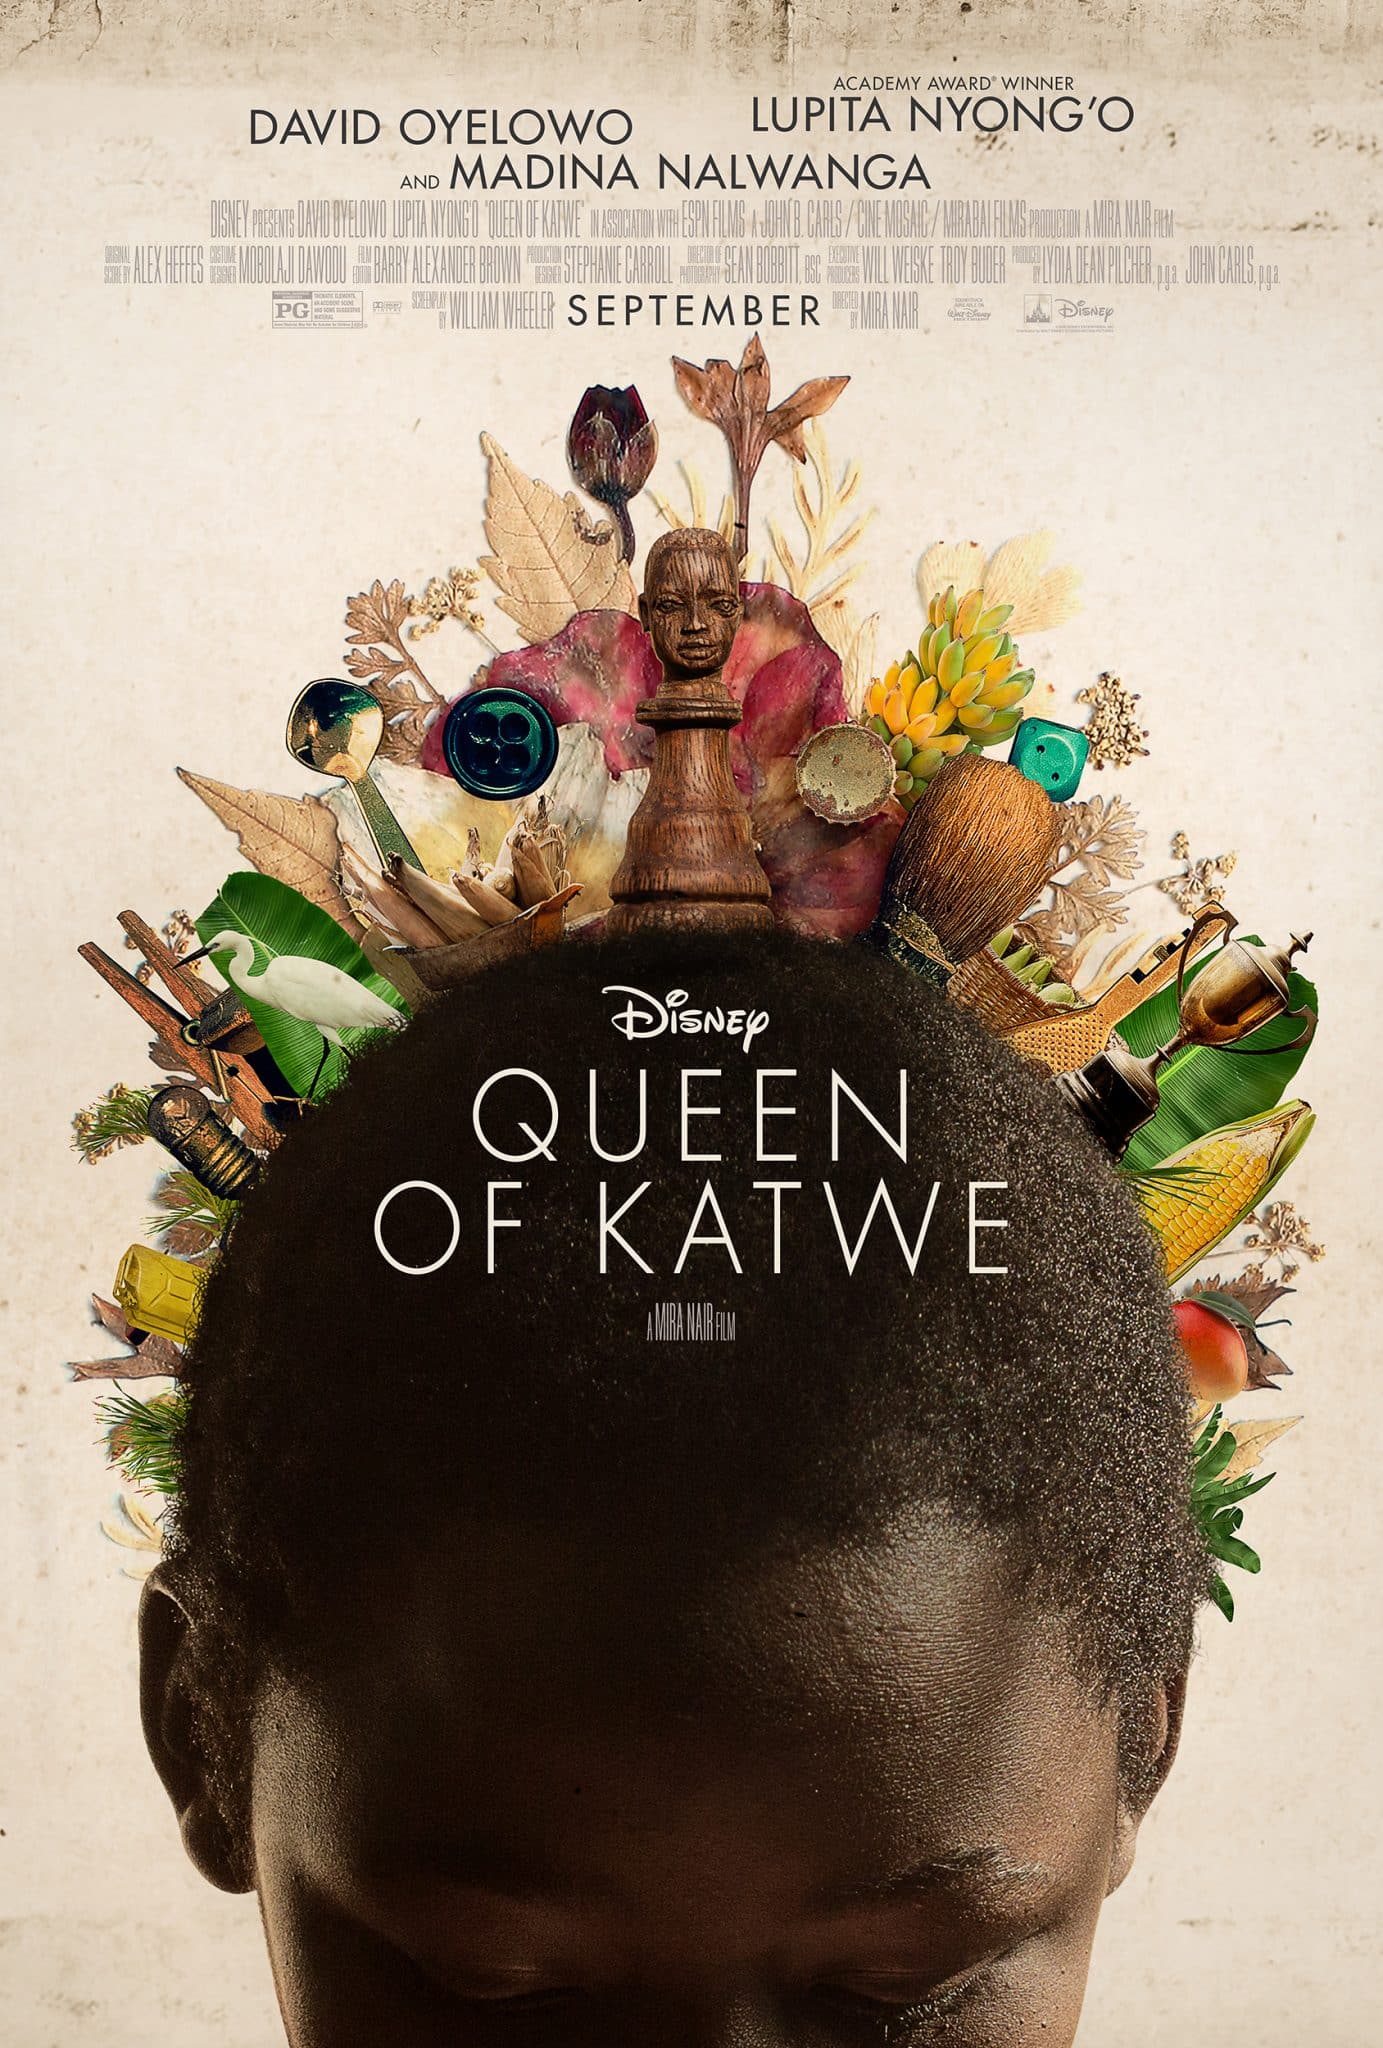 Disney's Queen of Katwe in theaters Sept 23 | ThisNThatwithOlivia.com